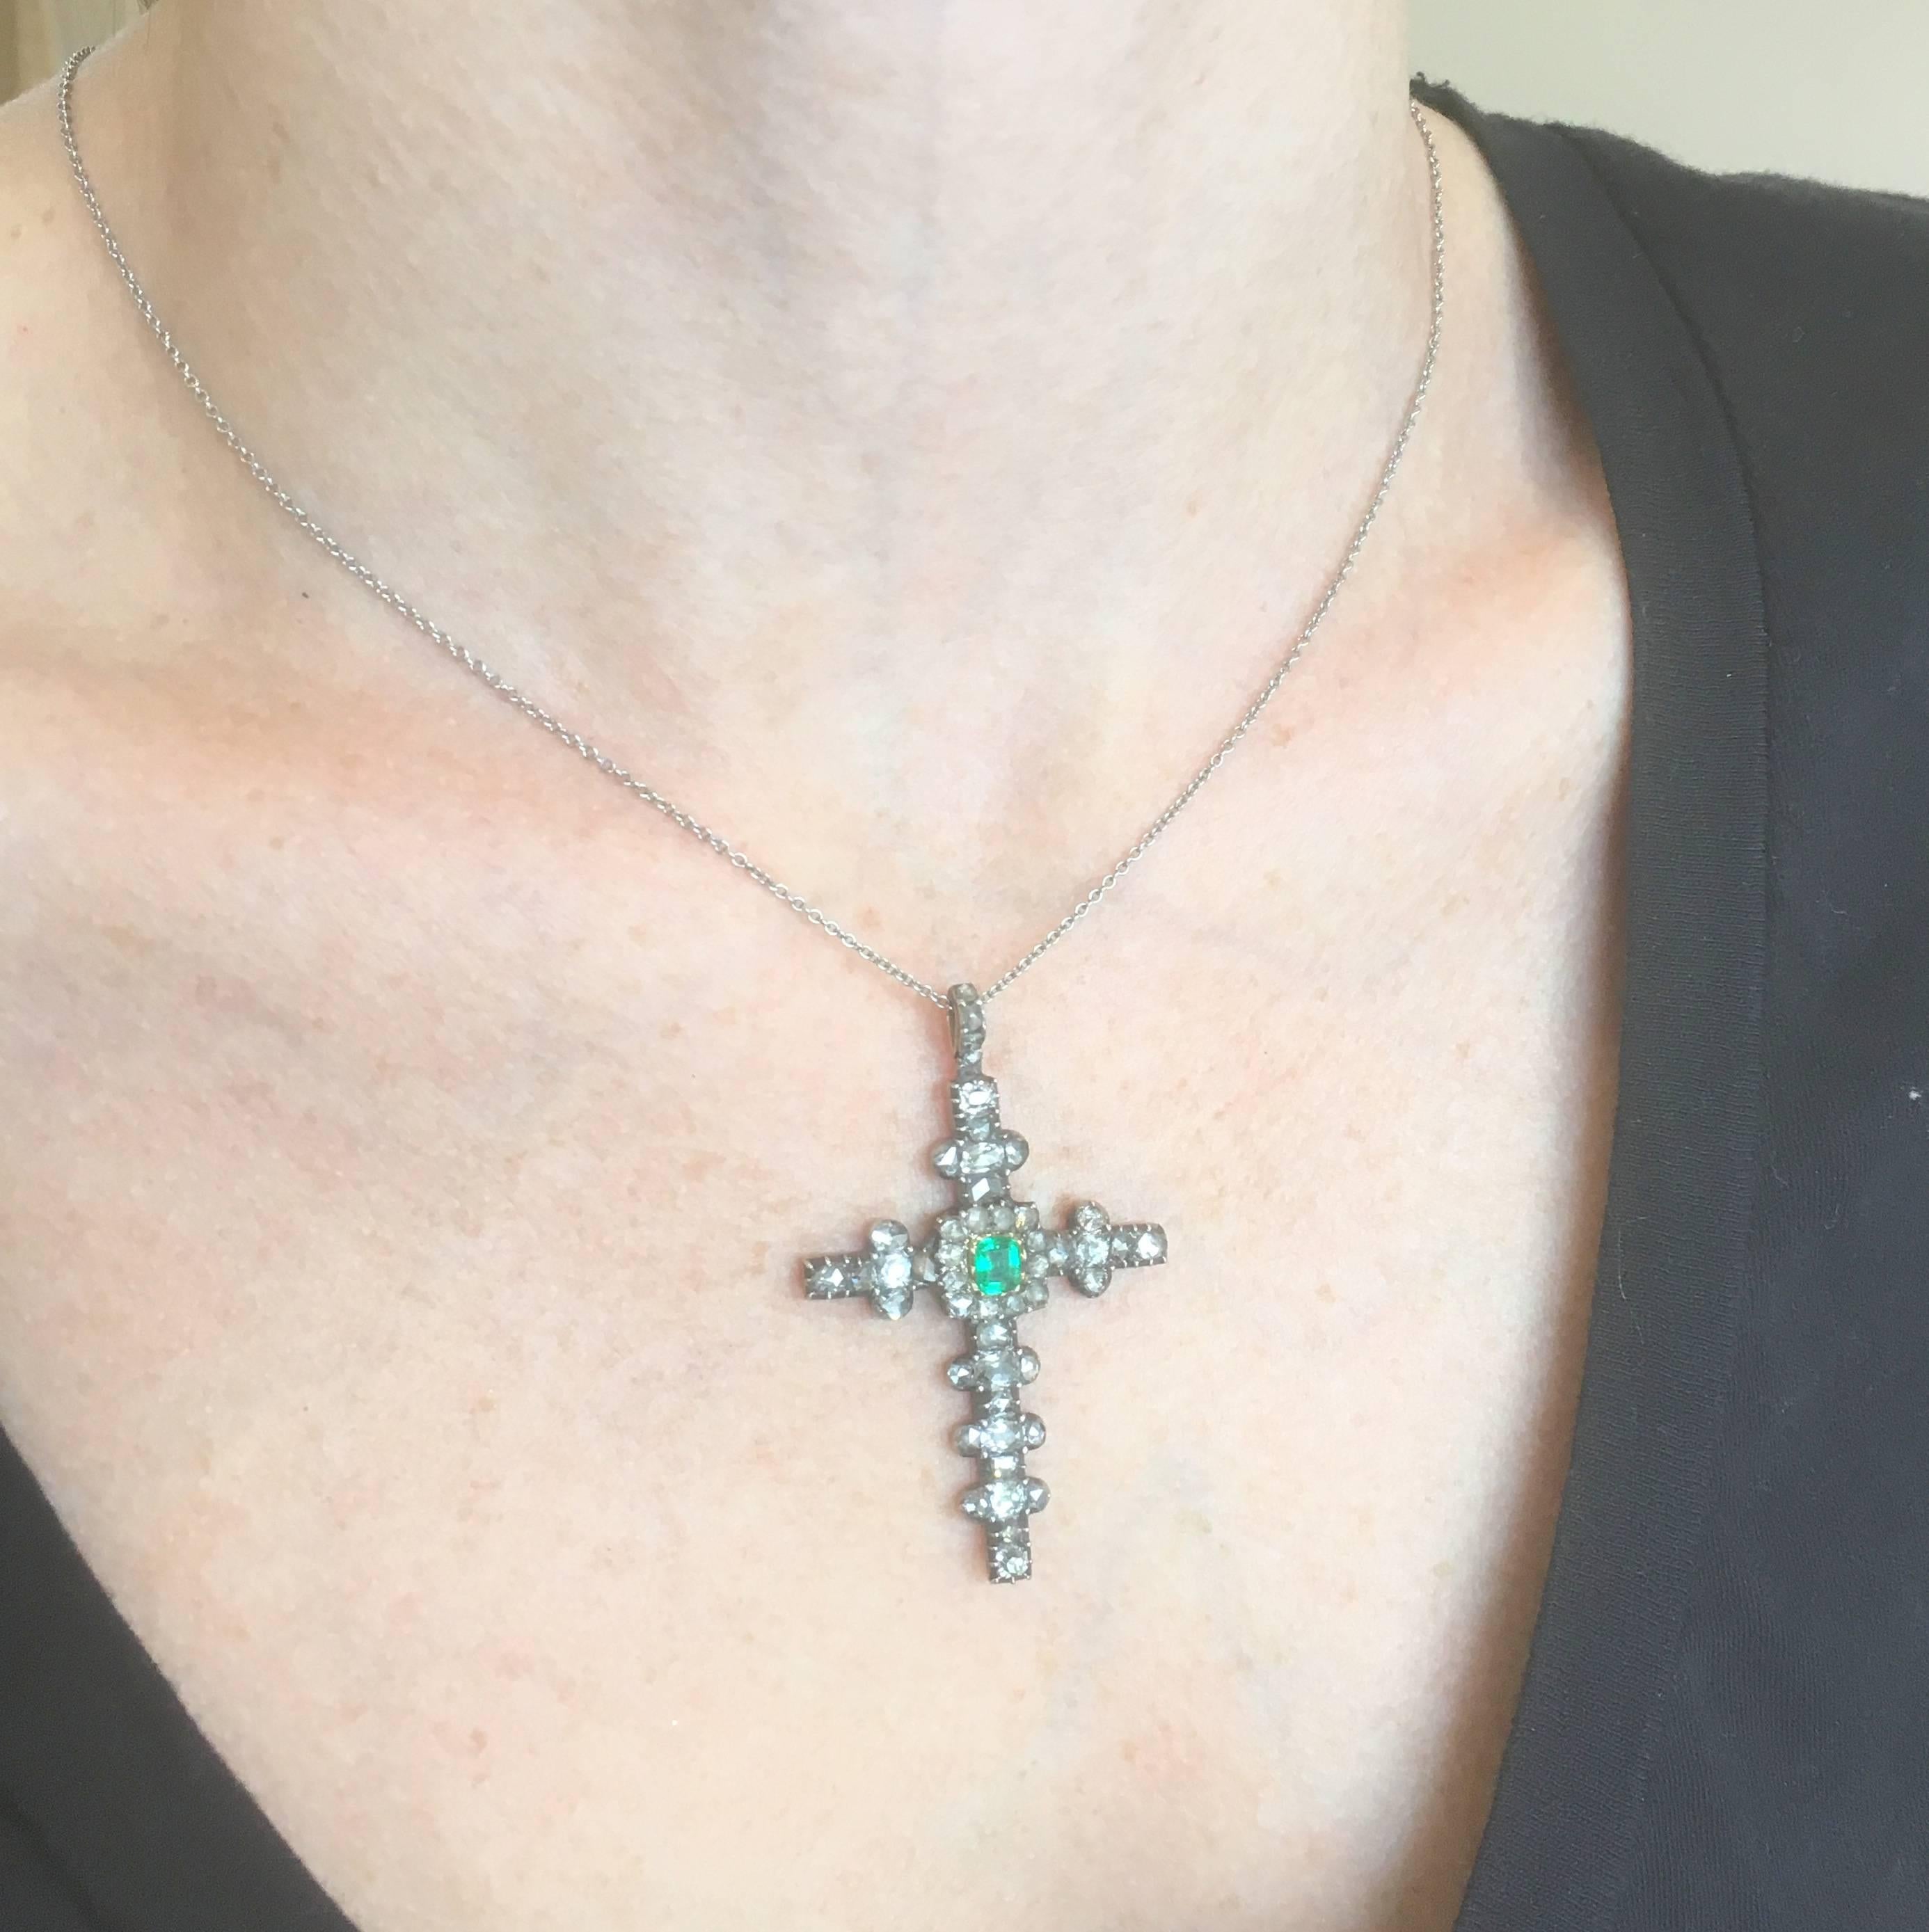 A spectacular cross pendant which bursts with history and character. At the cross’s heart is a bright, verdant green emerald set in yellow gold, with ten rose cut diamonds in the immediate surround. The ornate, stylised arms are encrusted with eight